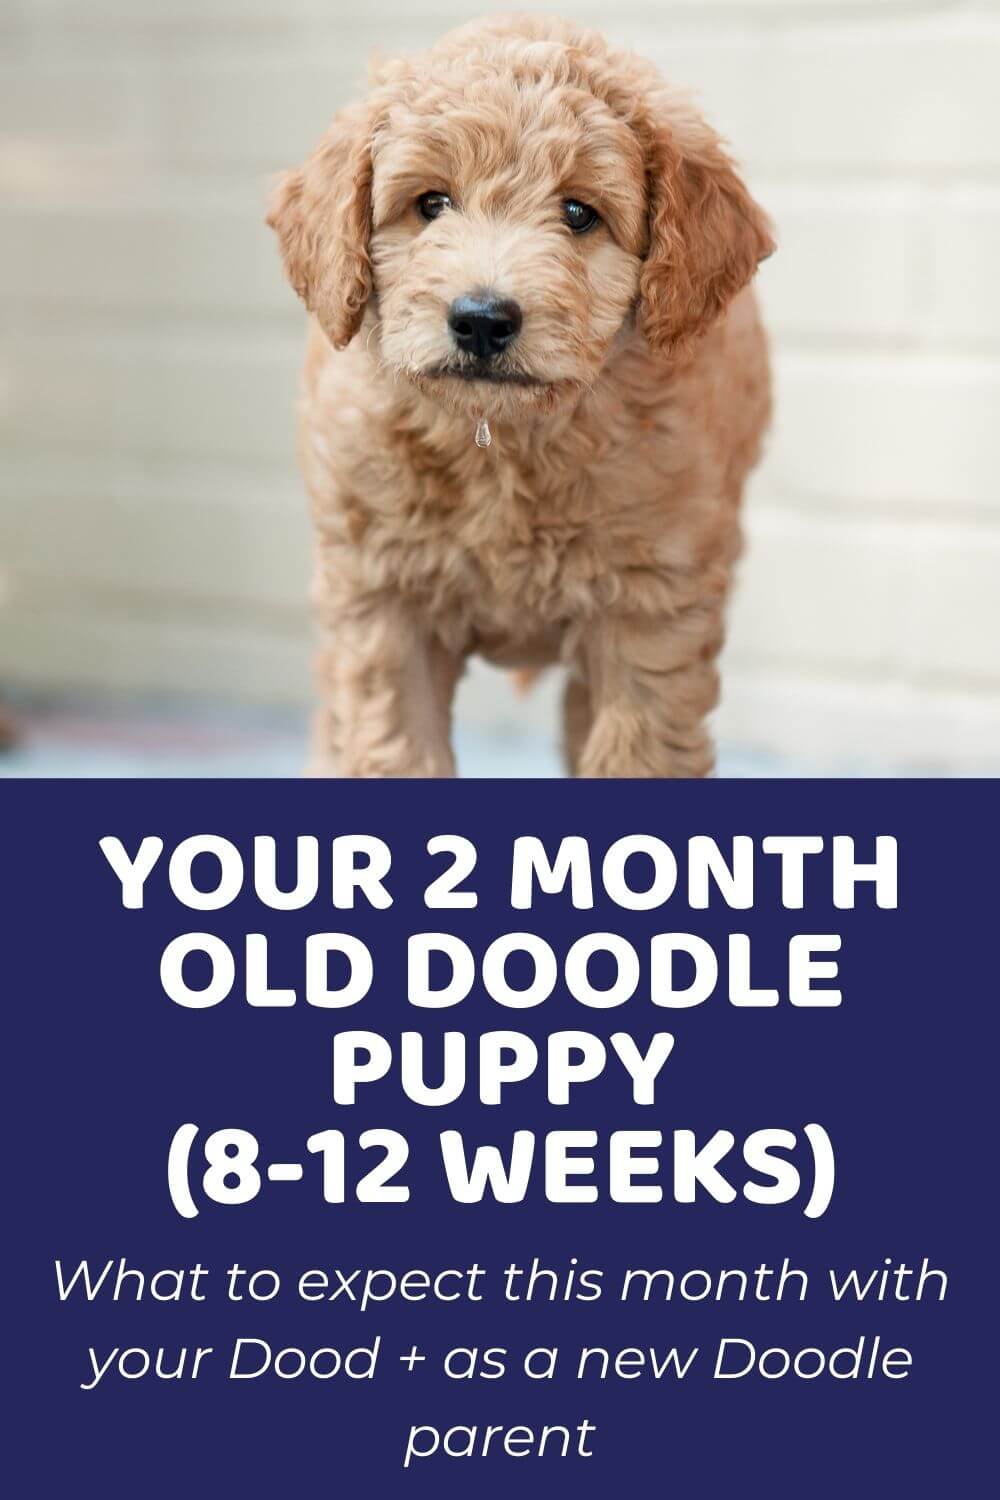 Your 2 Month Old Doodle Puppy (8-12 weeks)